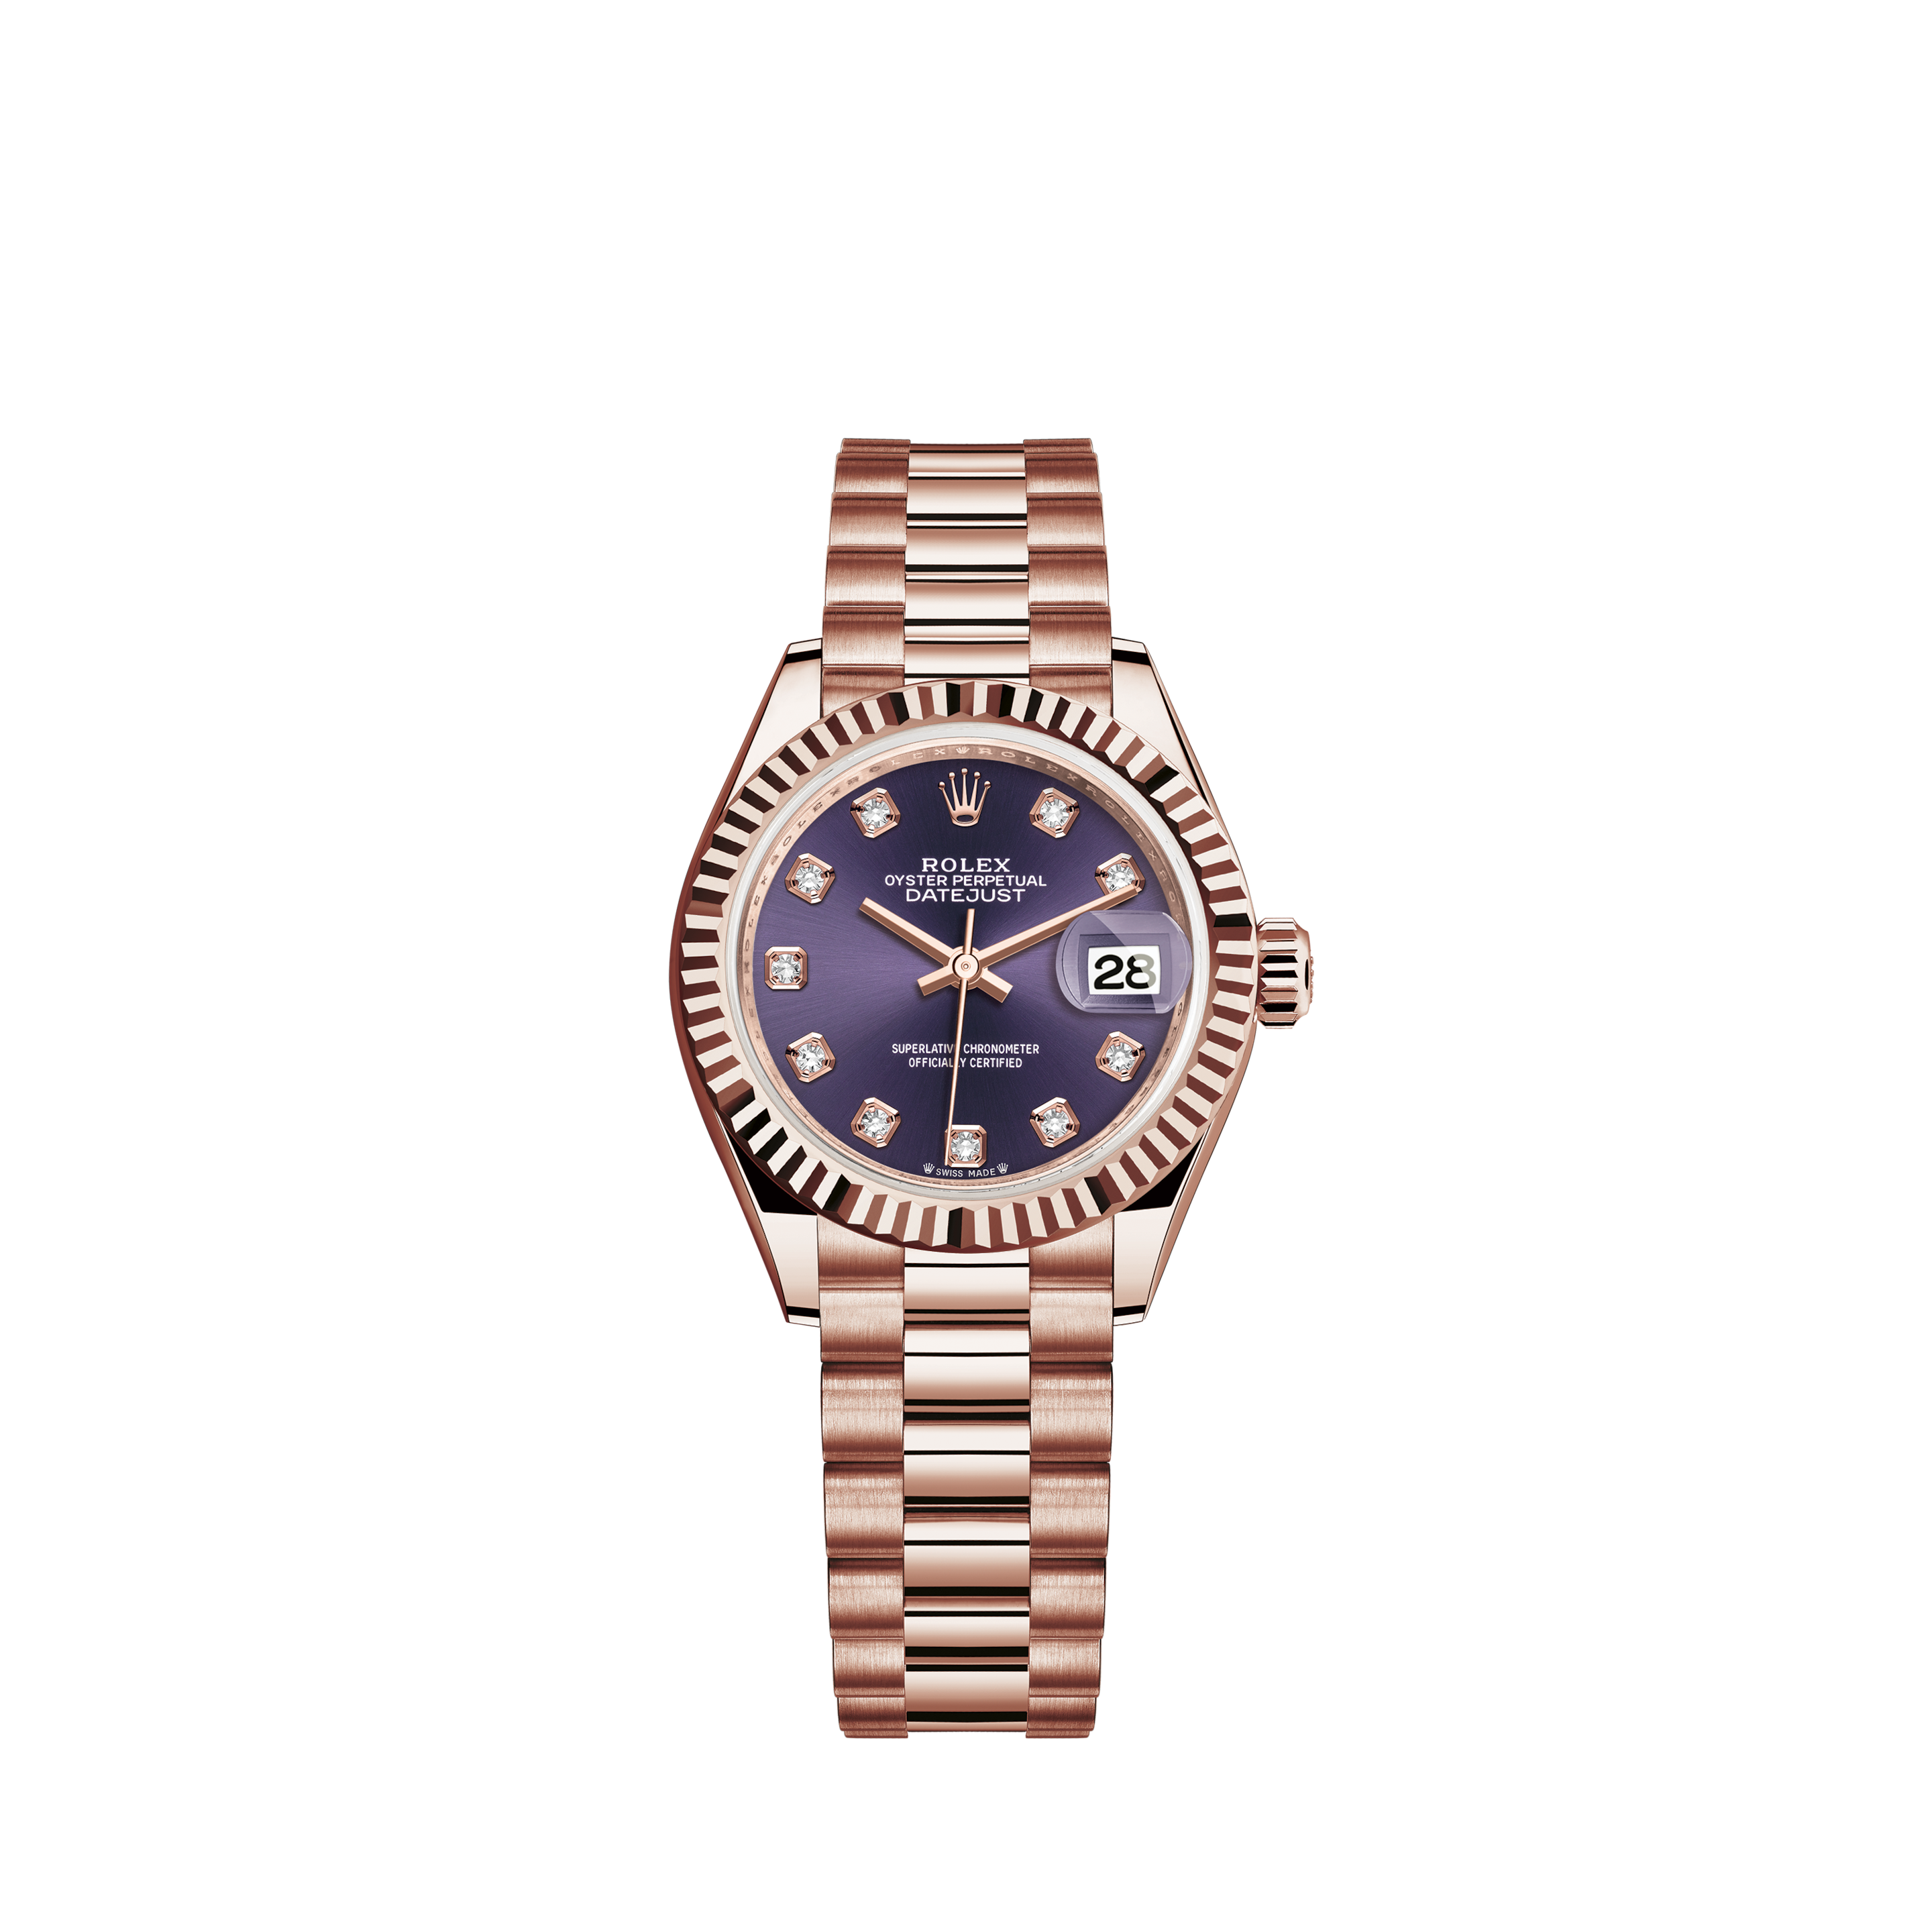 Rolex Lady-Datejust 179174, mother of pearl dial with Roman numerals, automatic